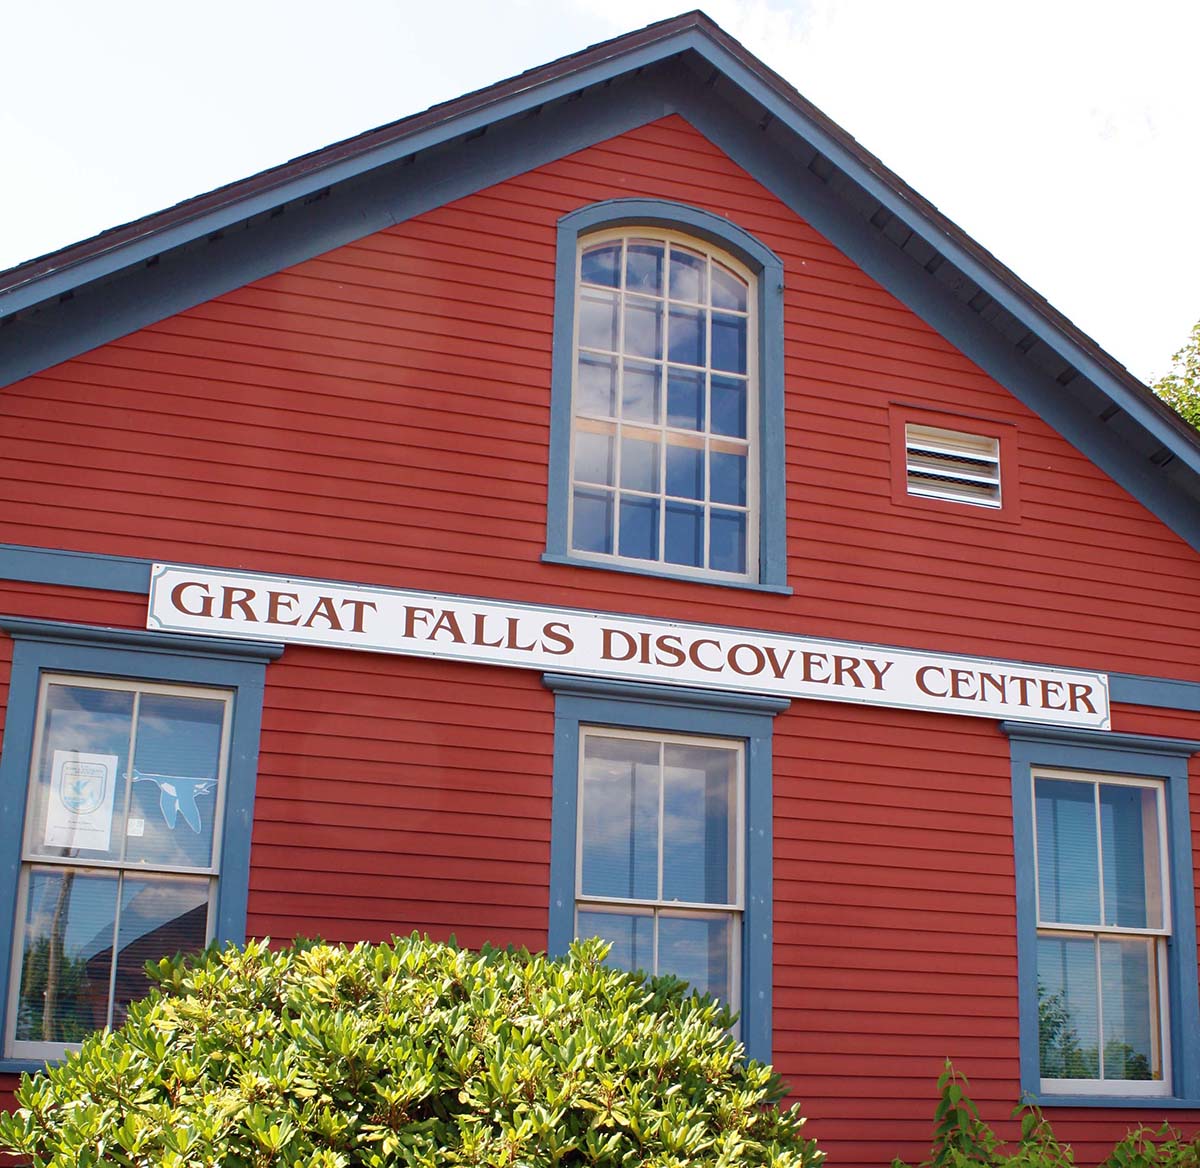 Great Falls Discovery Center